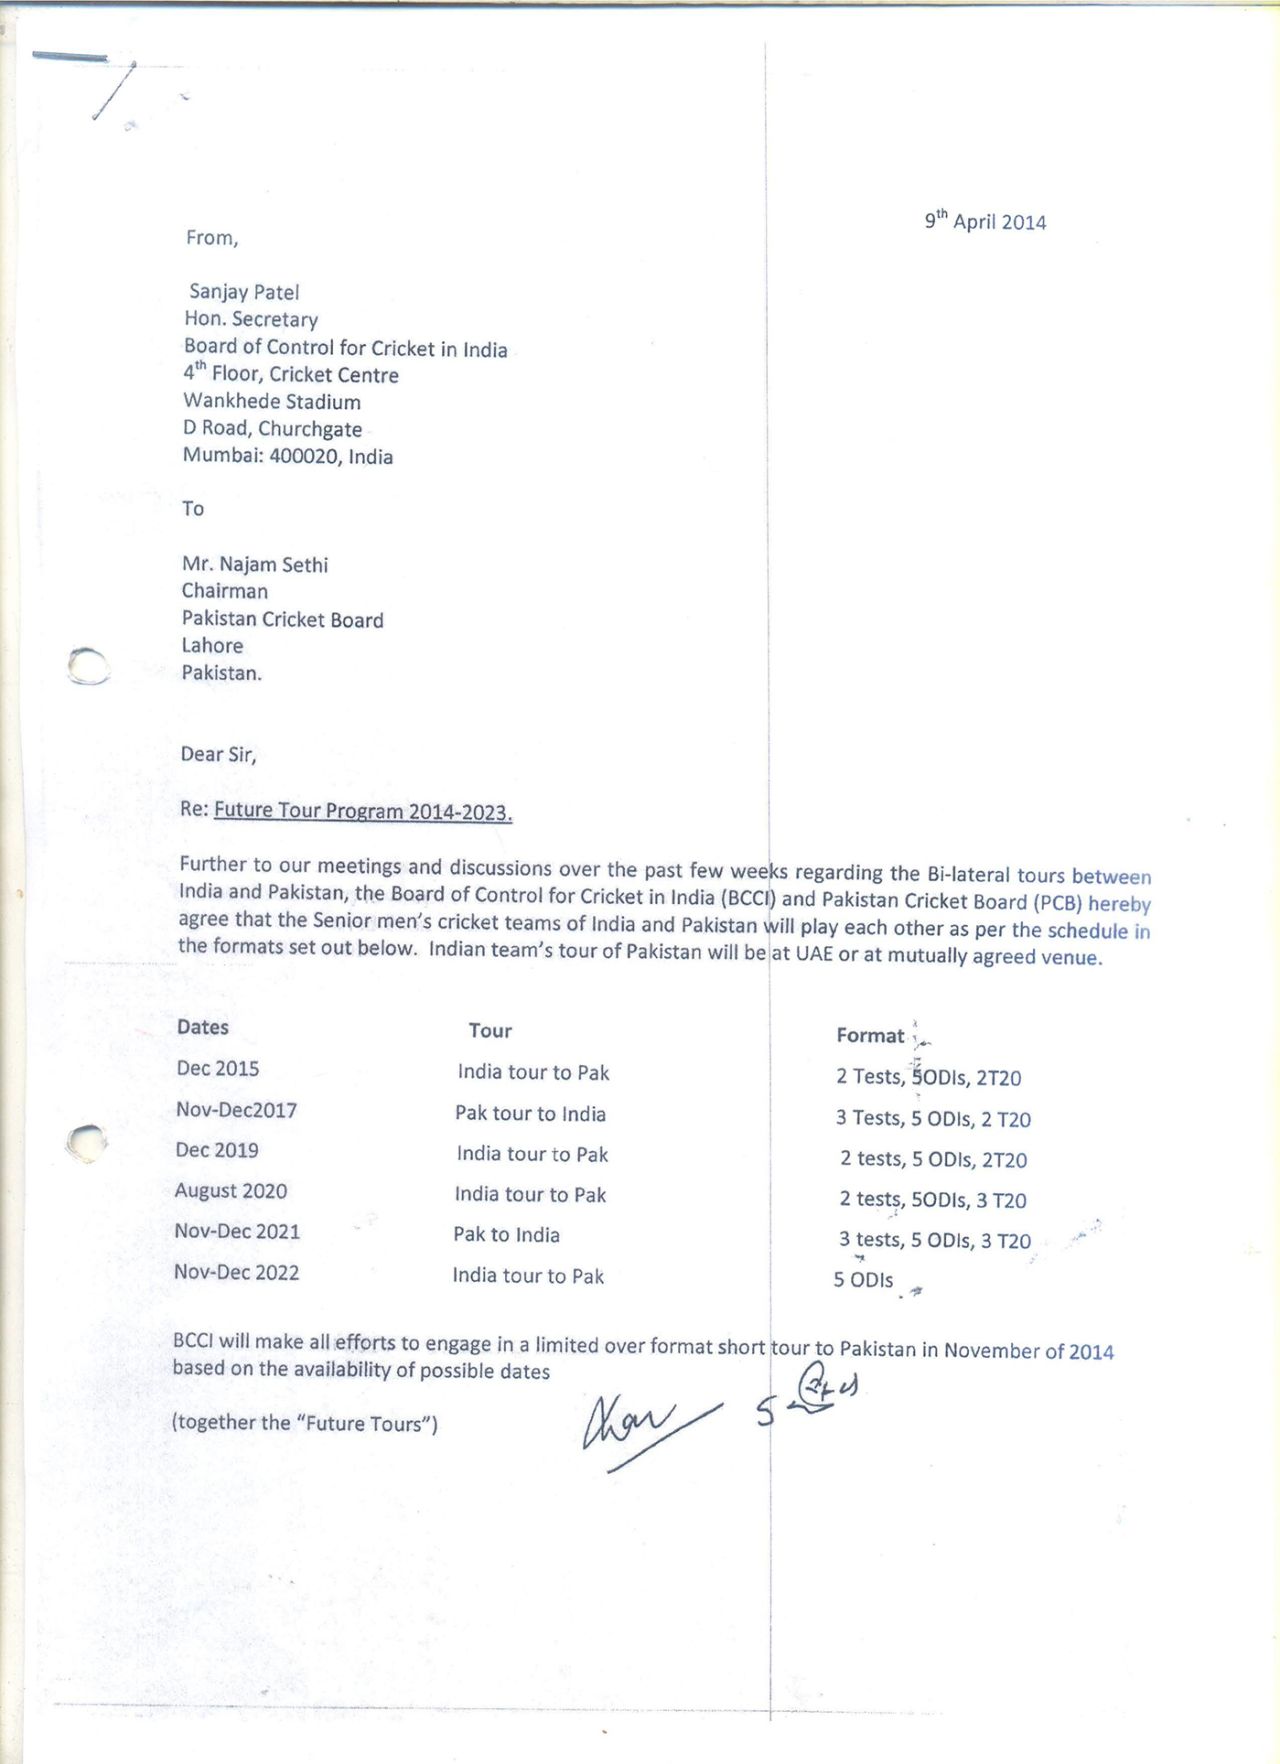 A page from a letter from former BCCI secretary Sanjay Patel to Najam Sethi on the bilateral series between India and Pakistan